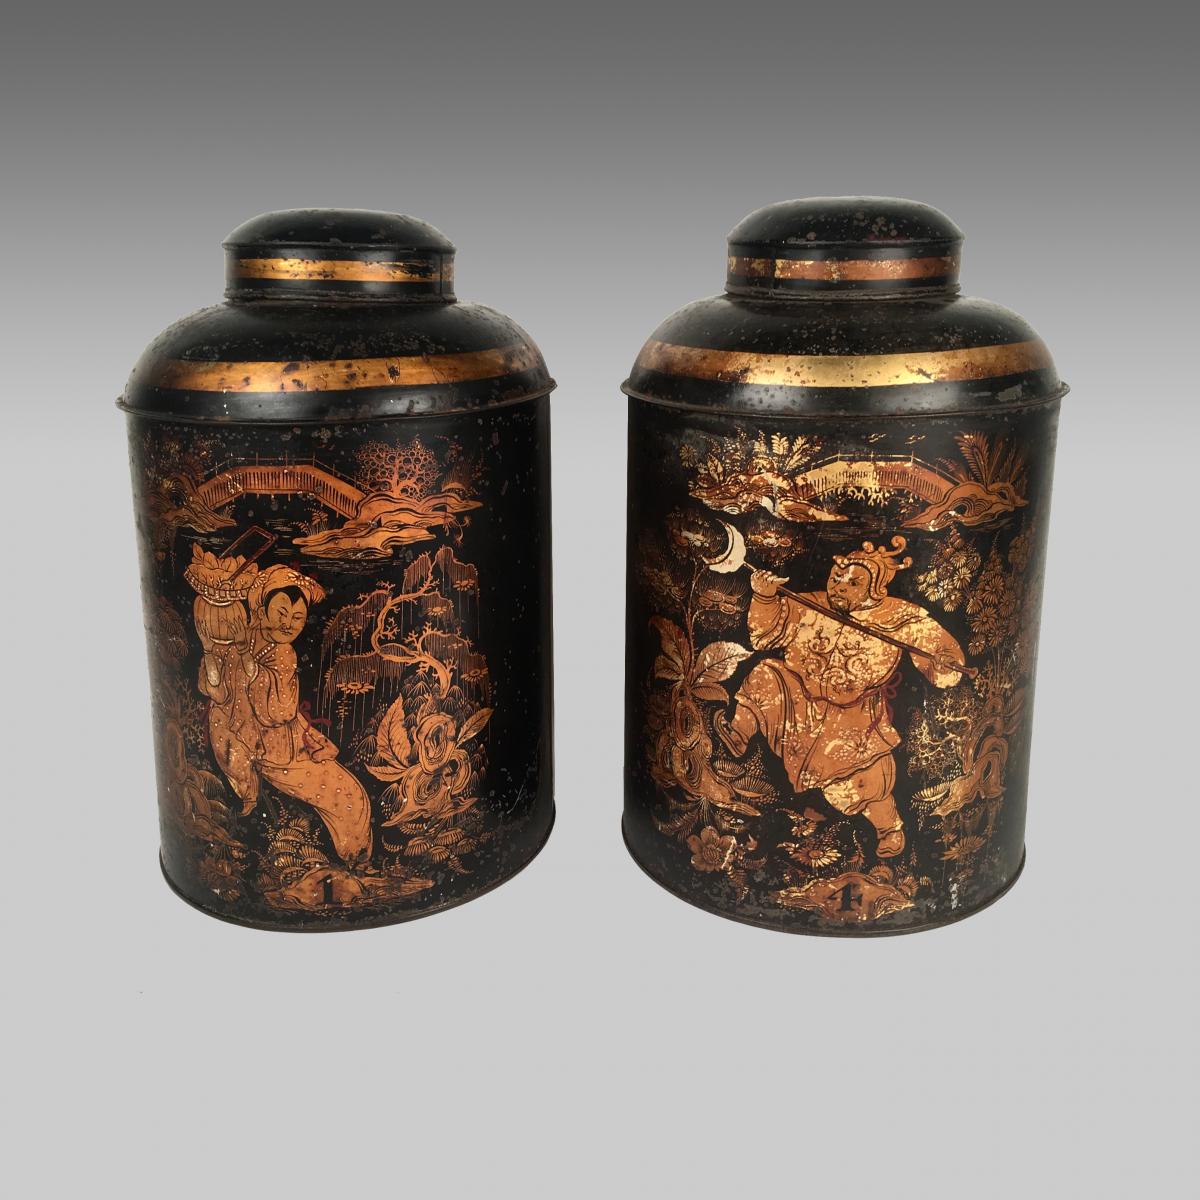 Antique pair of grocer's shop tea canisters